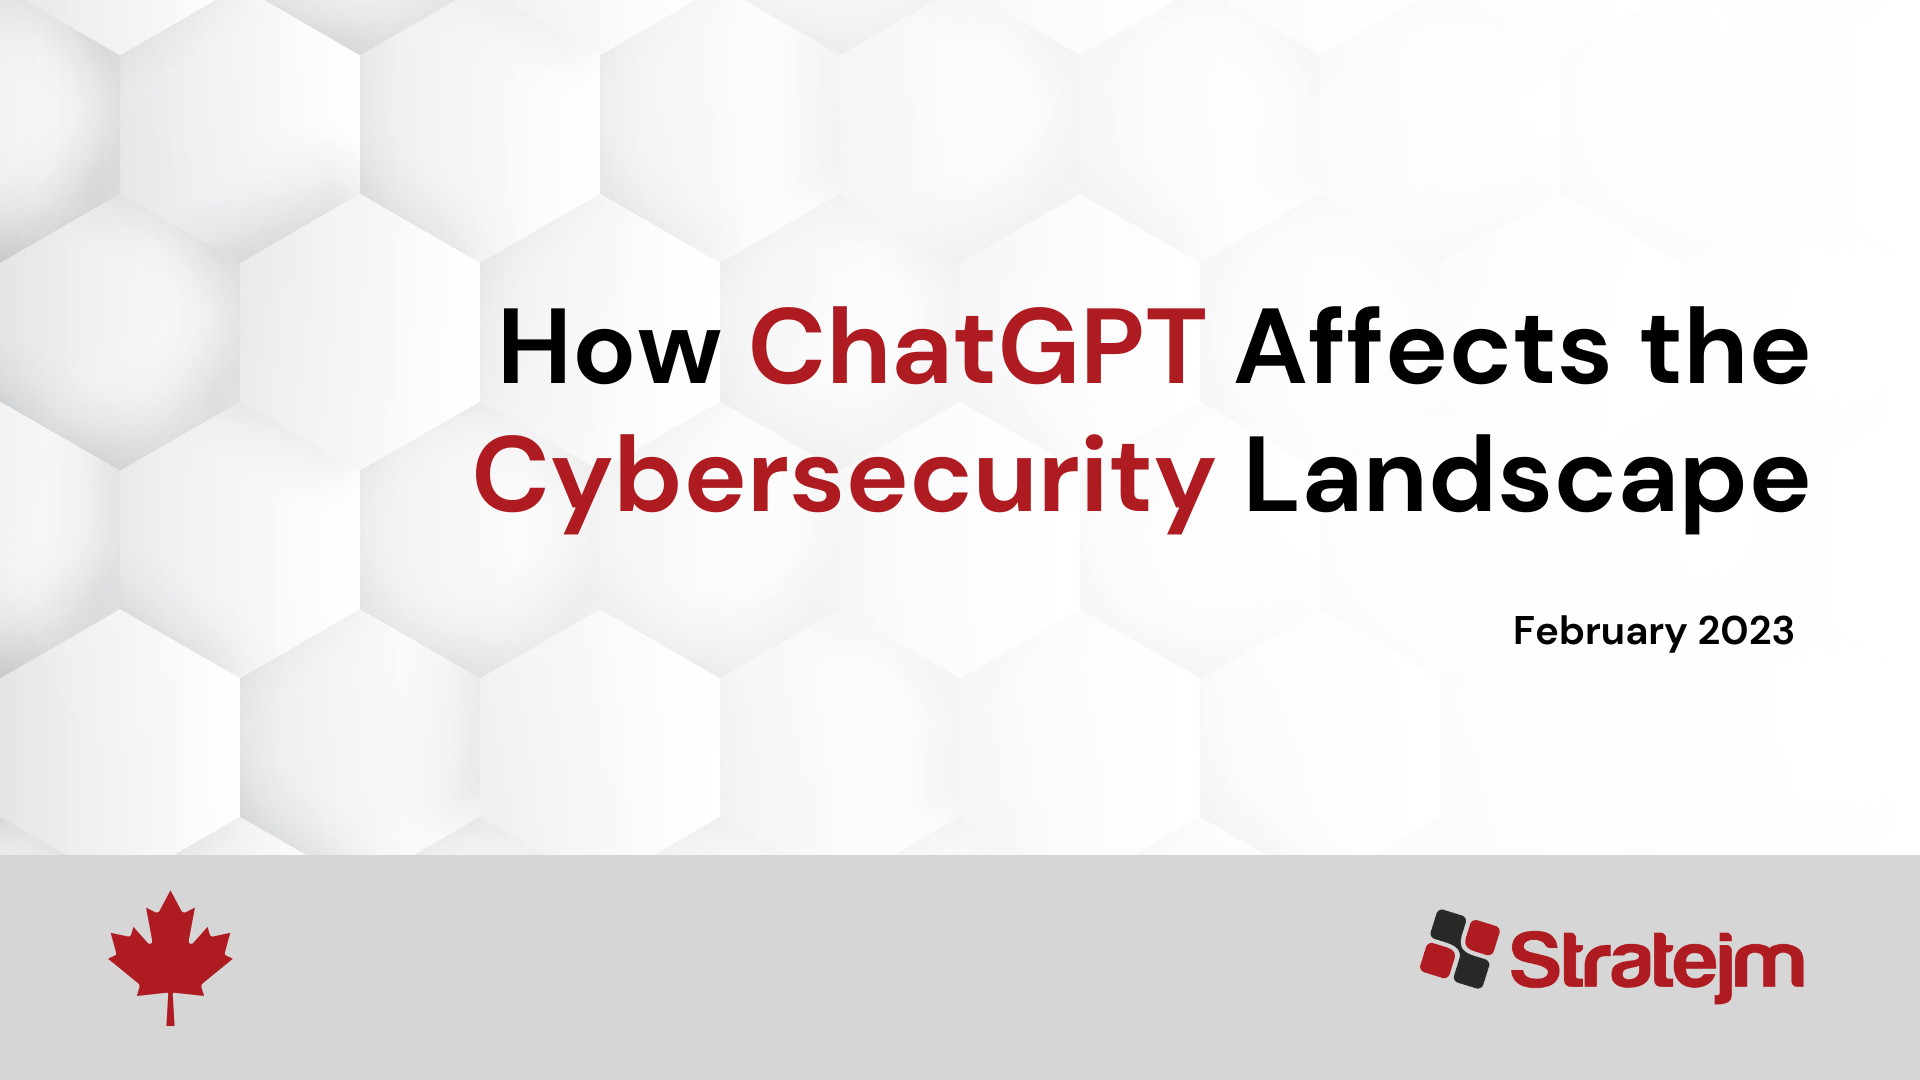 ChatGPT and cybersecurity - How Threat Actors are leveraging AI tools for nefarious purposes